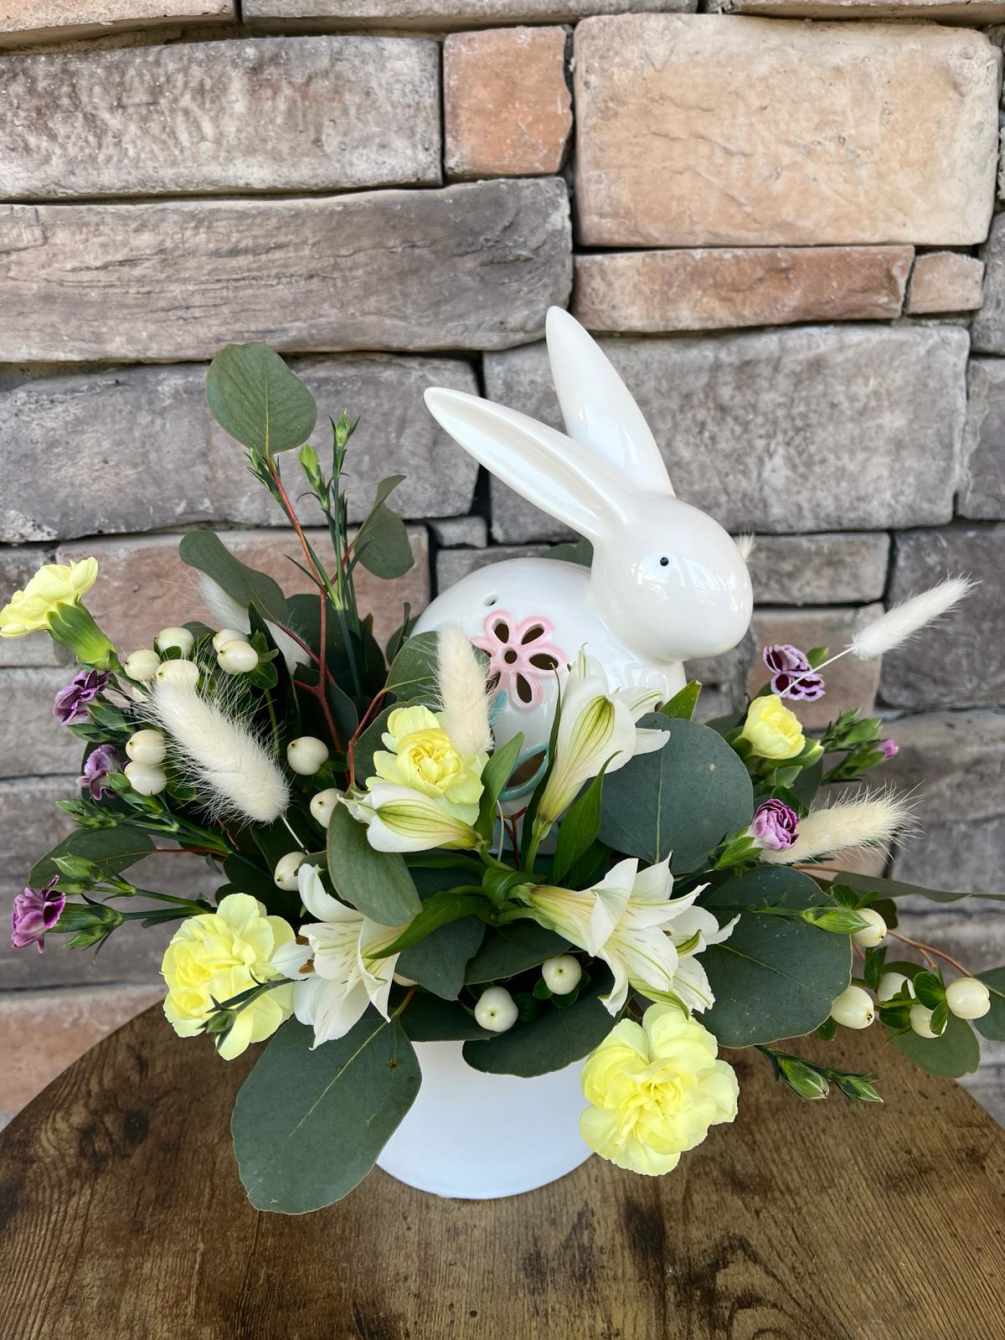 Bunny&#039;s Springtime Gathering: A Yellow Floral Easter Centerpiece

Welcome the joy of Easter